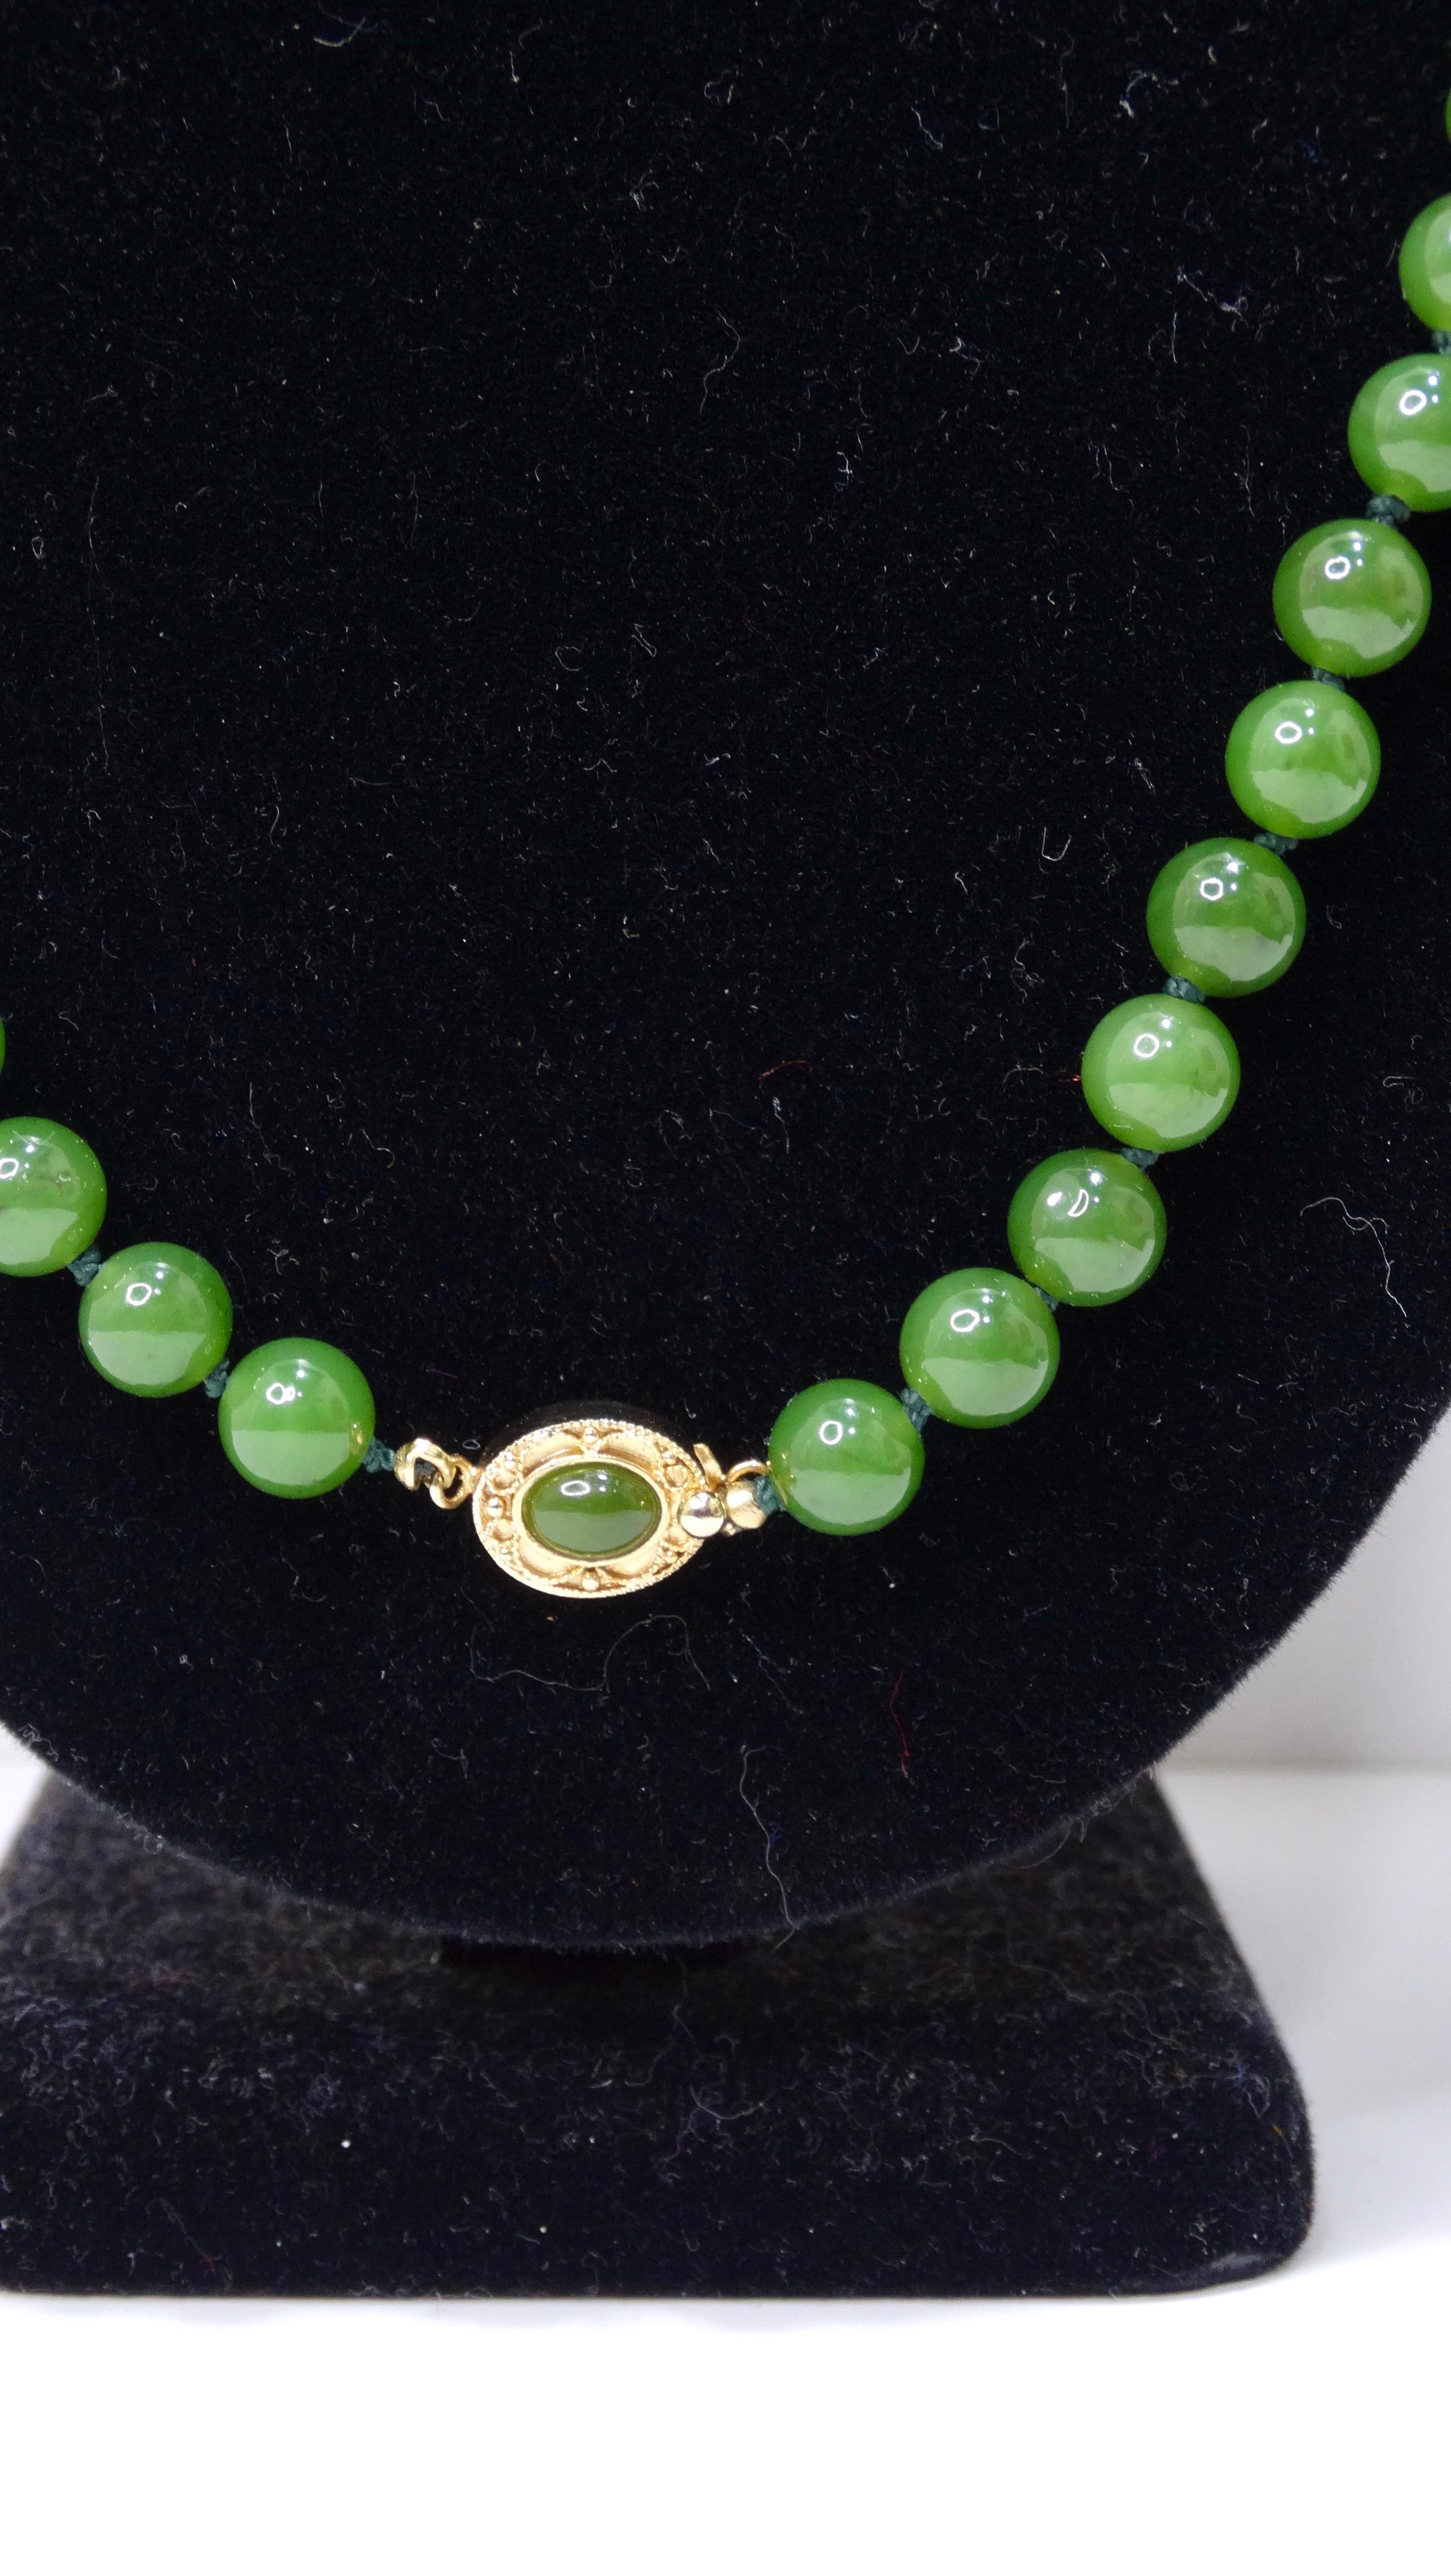 Add a beautiful jade beaded necklace to your jewelry collection! You will be in awe of the beauty of the vibrant green beads. This feature a fully beaded chain with a gold and jade pendant in the center. Pair this beautiful necklace with a Prada